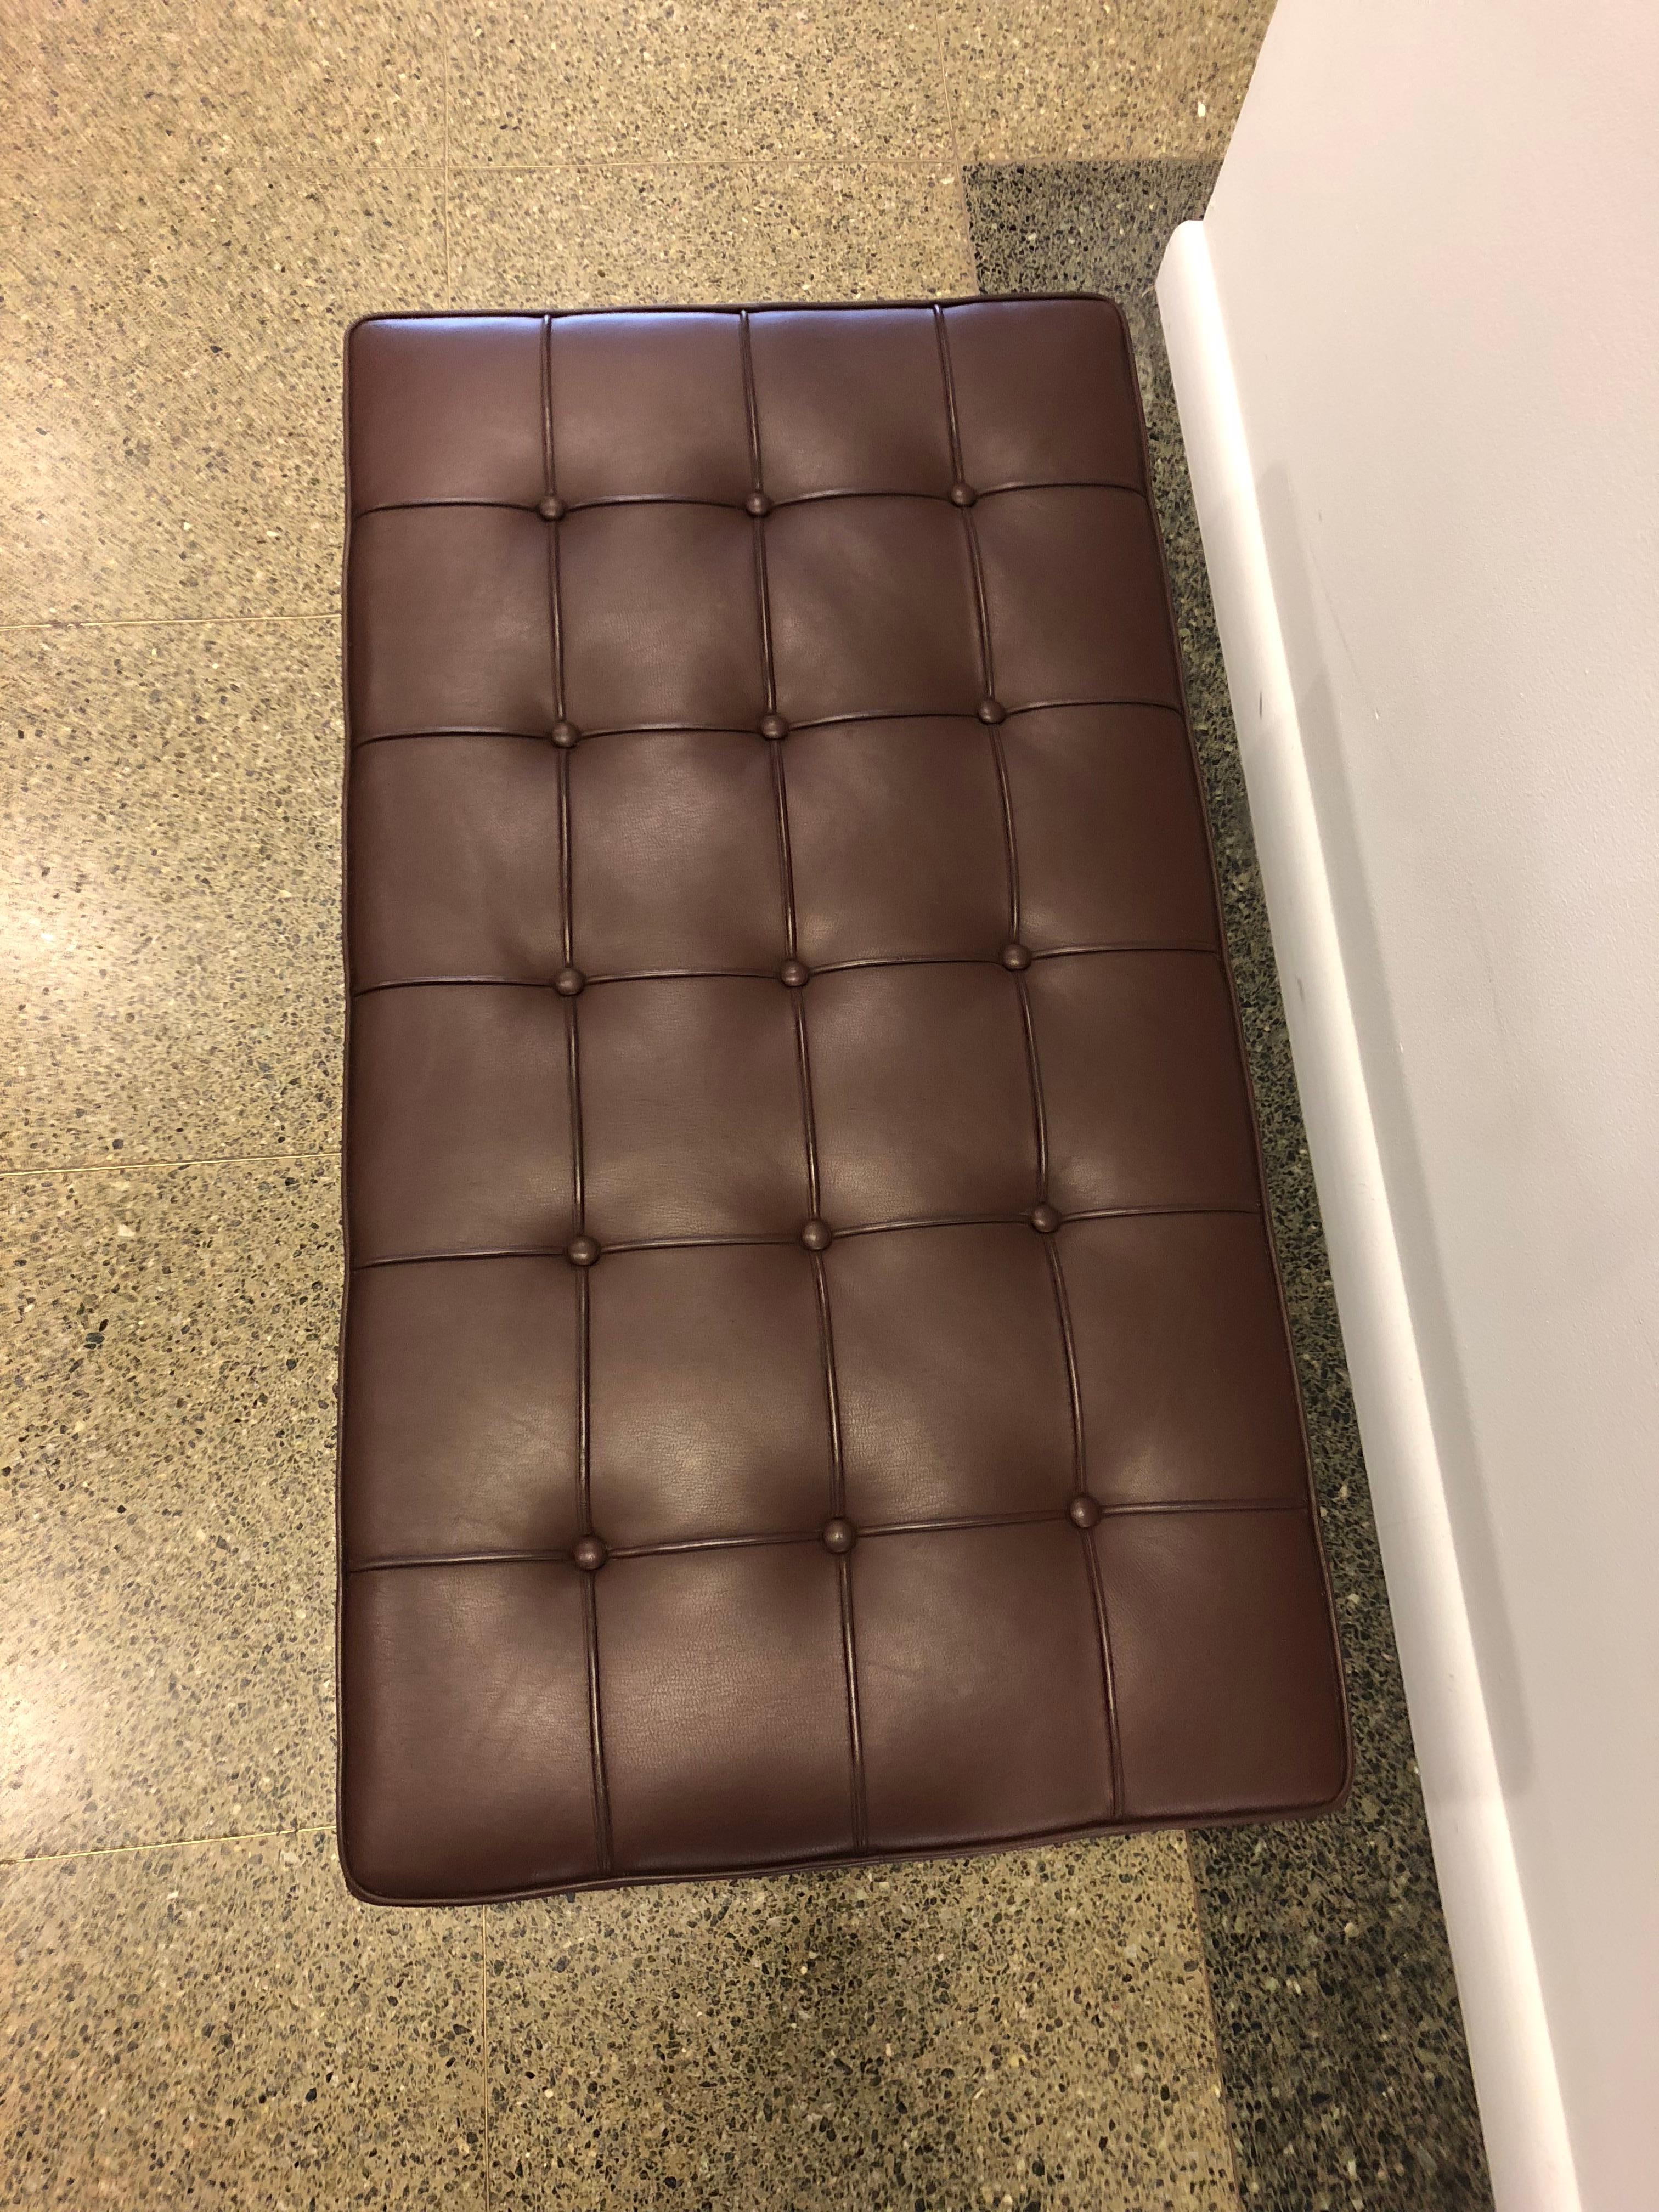 Mid-Century Modern Florence Knoll Tufted Brown Leather and Chrome Bench, Mfg. Knoll